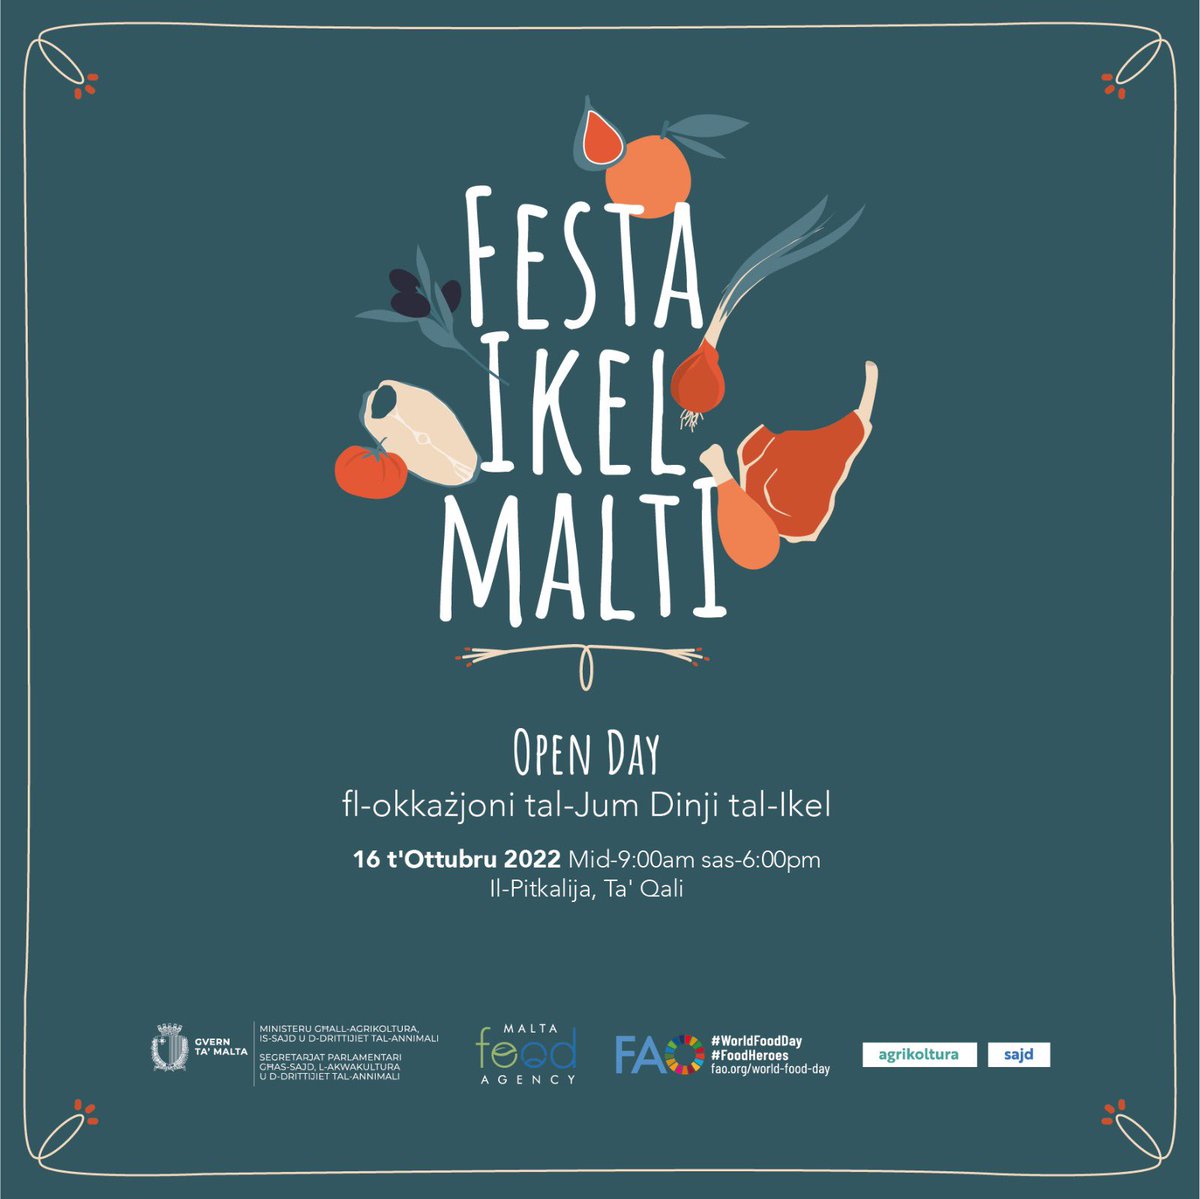 Today we launched Malta’s very own Maltese Food Festival @ the Pitkalija Market in Ta’ Qali on the occasion of World Food Day which is celebrated globally on the 16th of October 🍊🥬🥩🐟 @FAOfish See you there 👋 #food #foodfestival #malta #worldfoodday #Sustainability